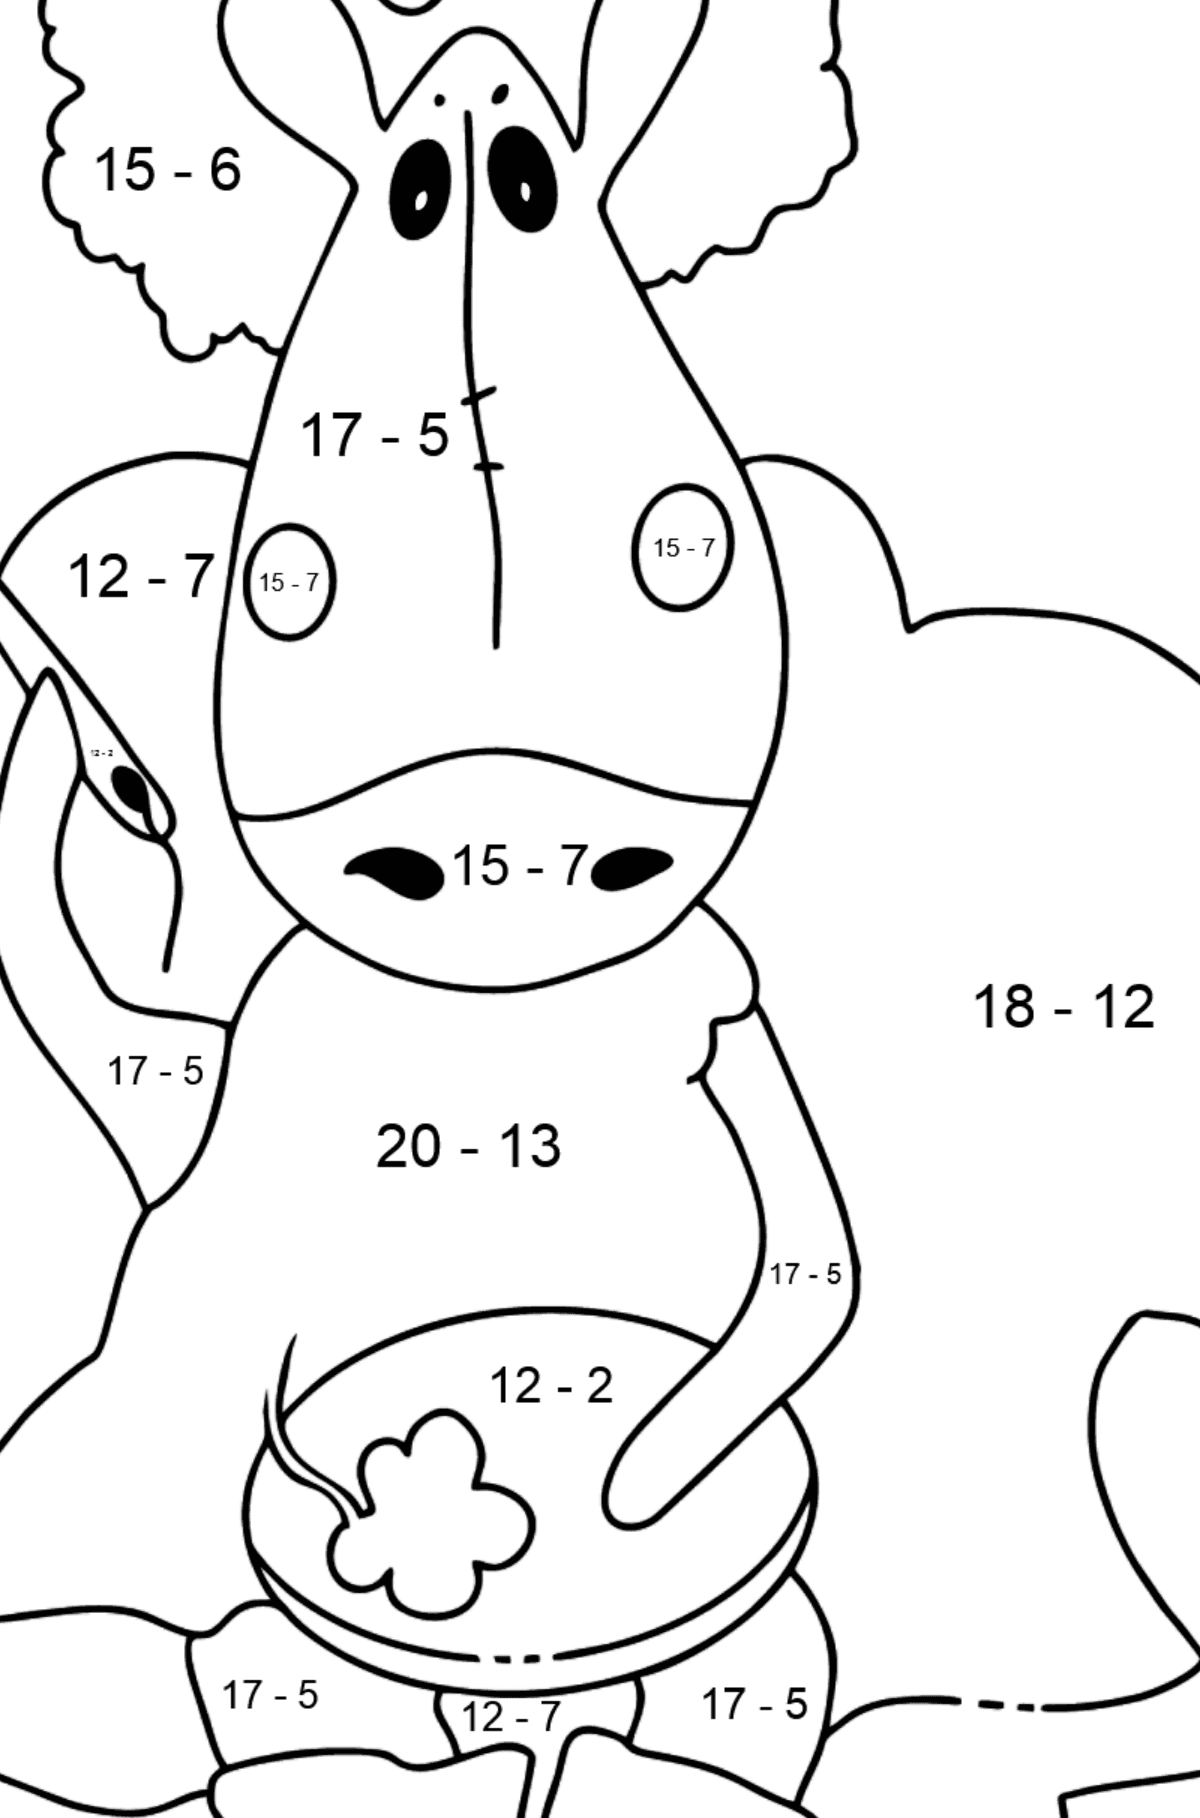 Coloring page fairytale horse (easy) - Math Coloring - Subtraction for Kids